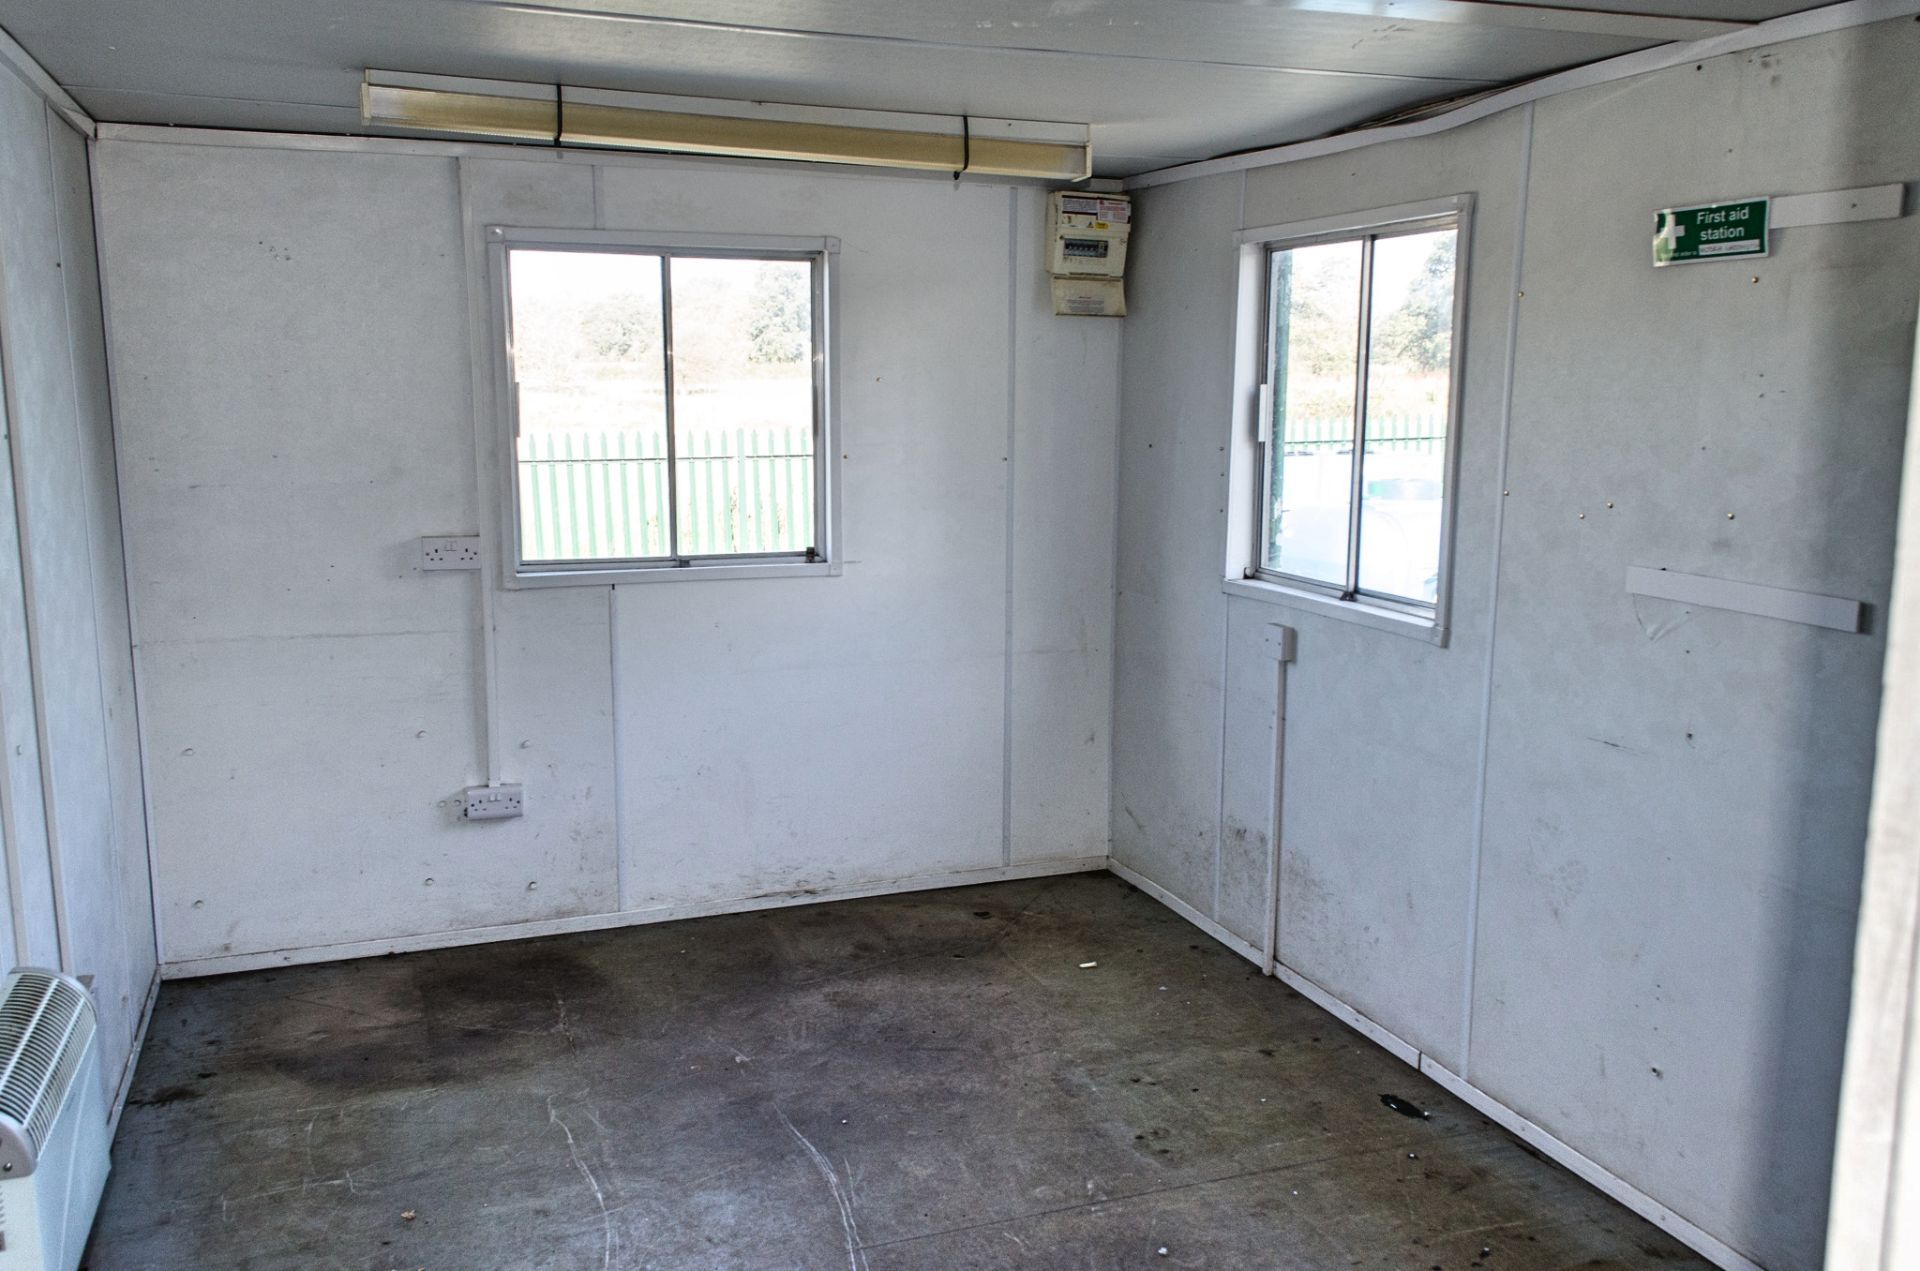 32 ft x 10 ft steel anti vandal jack leg office site unit Comprising of: lobby & 2 - offices - Image 7 of 7